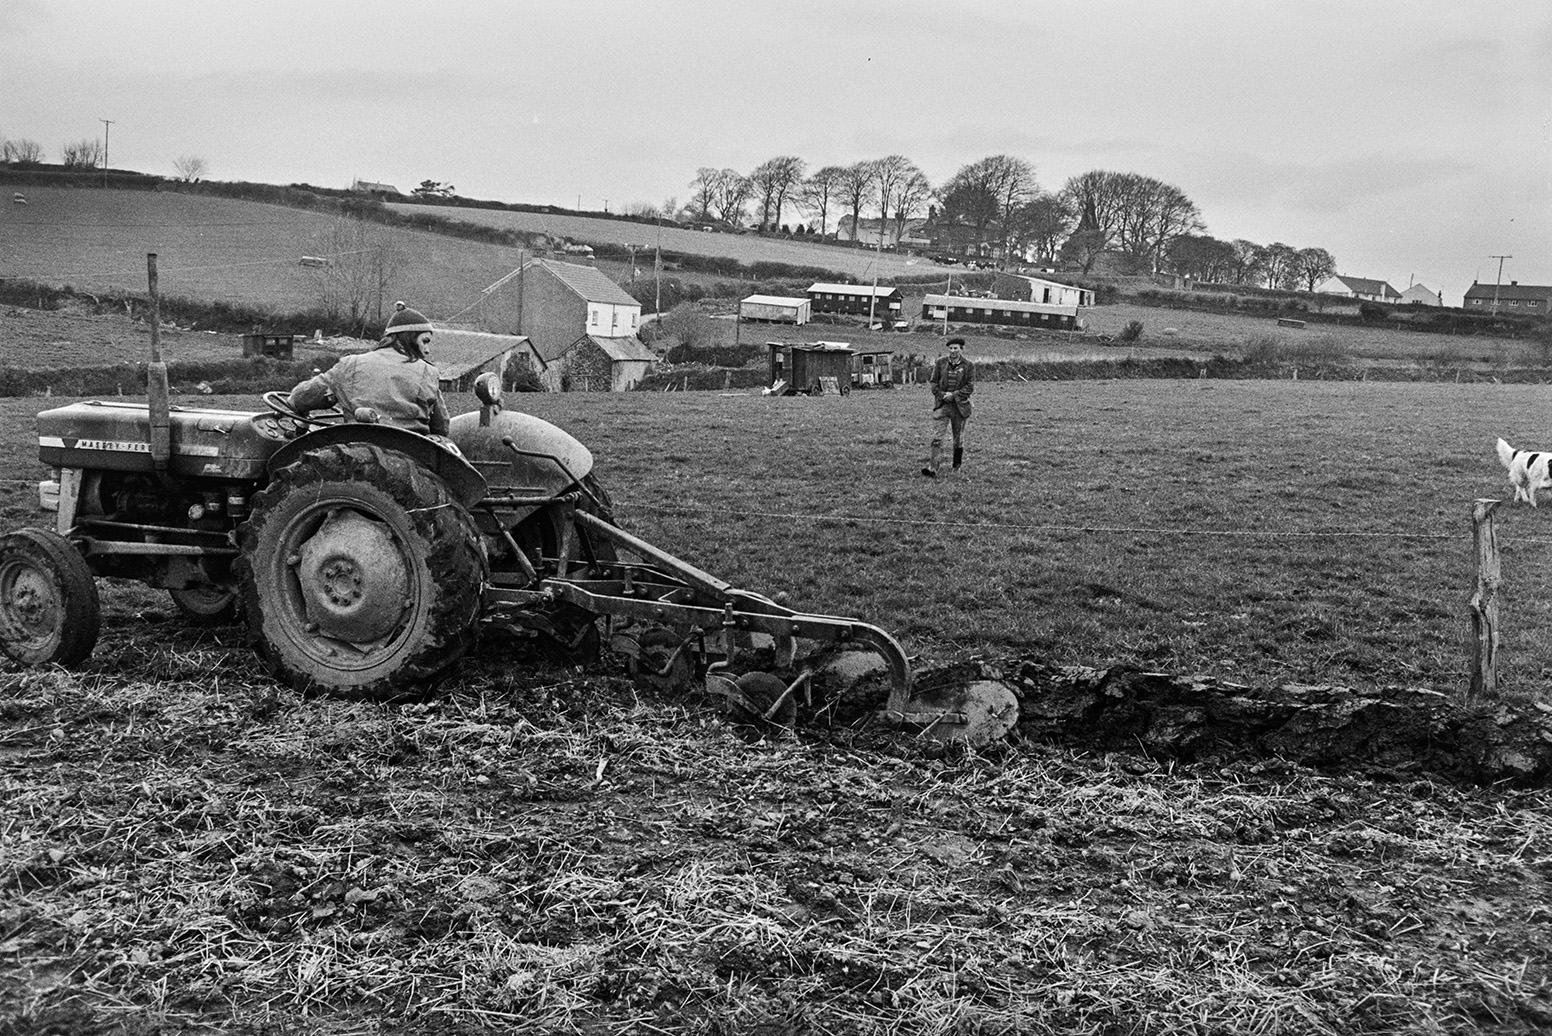 Derek Bright ploughing a field at Mill Road Farm, Beaford so it is ready to plant corn. Ivor Bourne is walking towards him and farm buildings can be seen in the background. The farm was also known as Jeffrys.